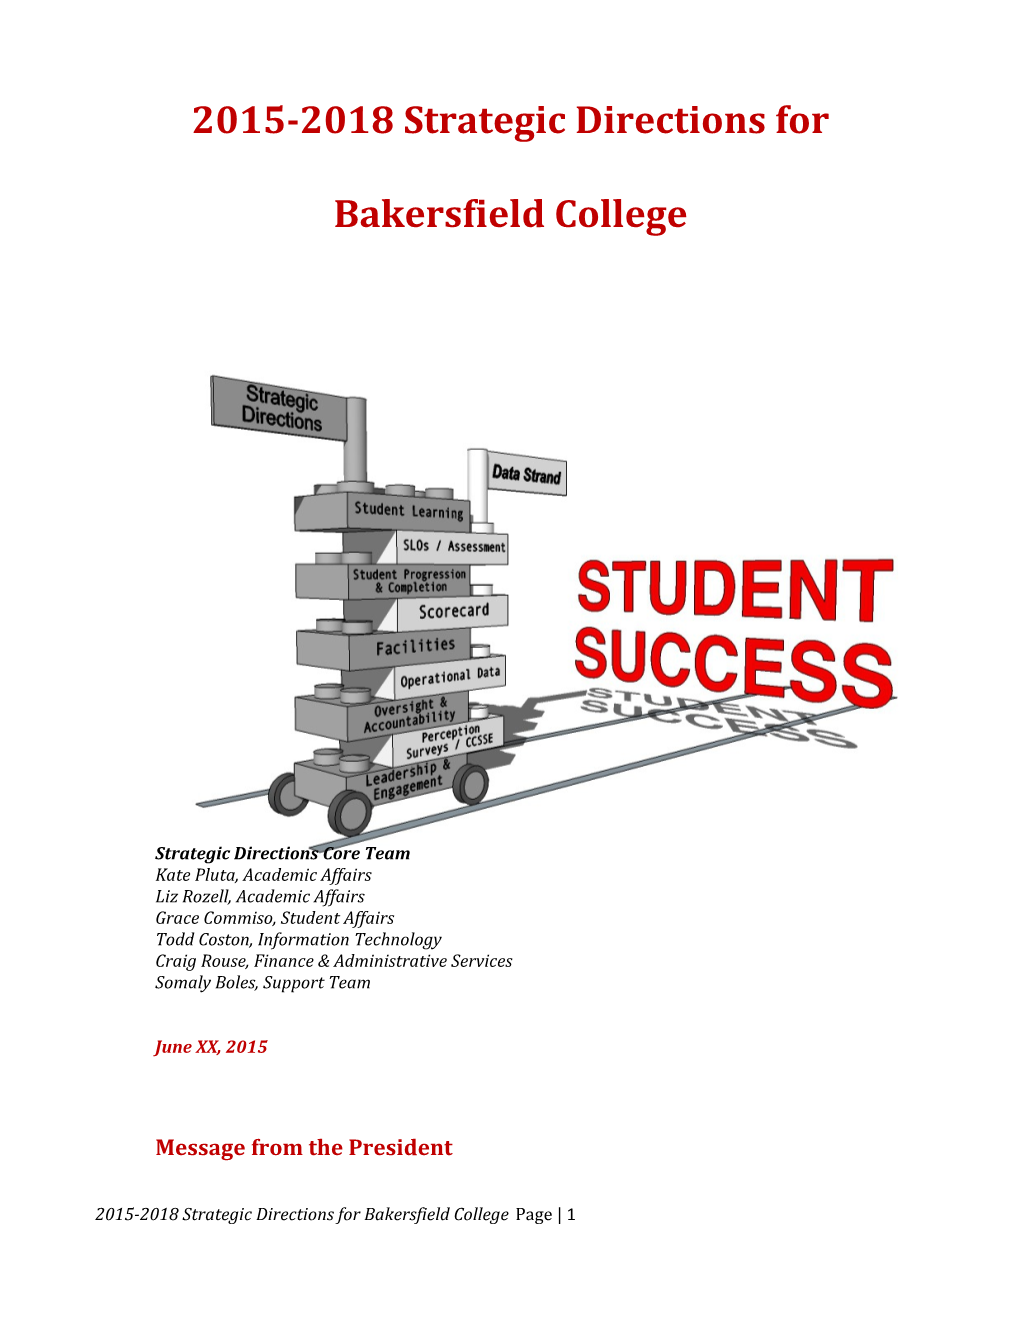 2015-2018 Strategic Directions for Bakersfield College